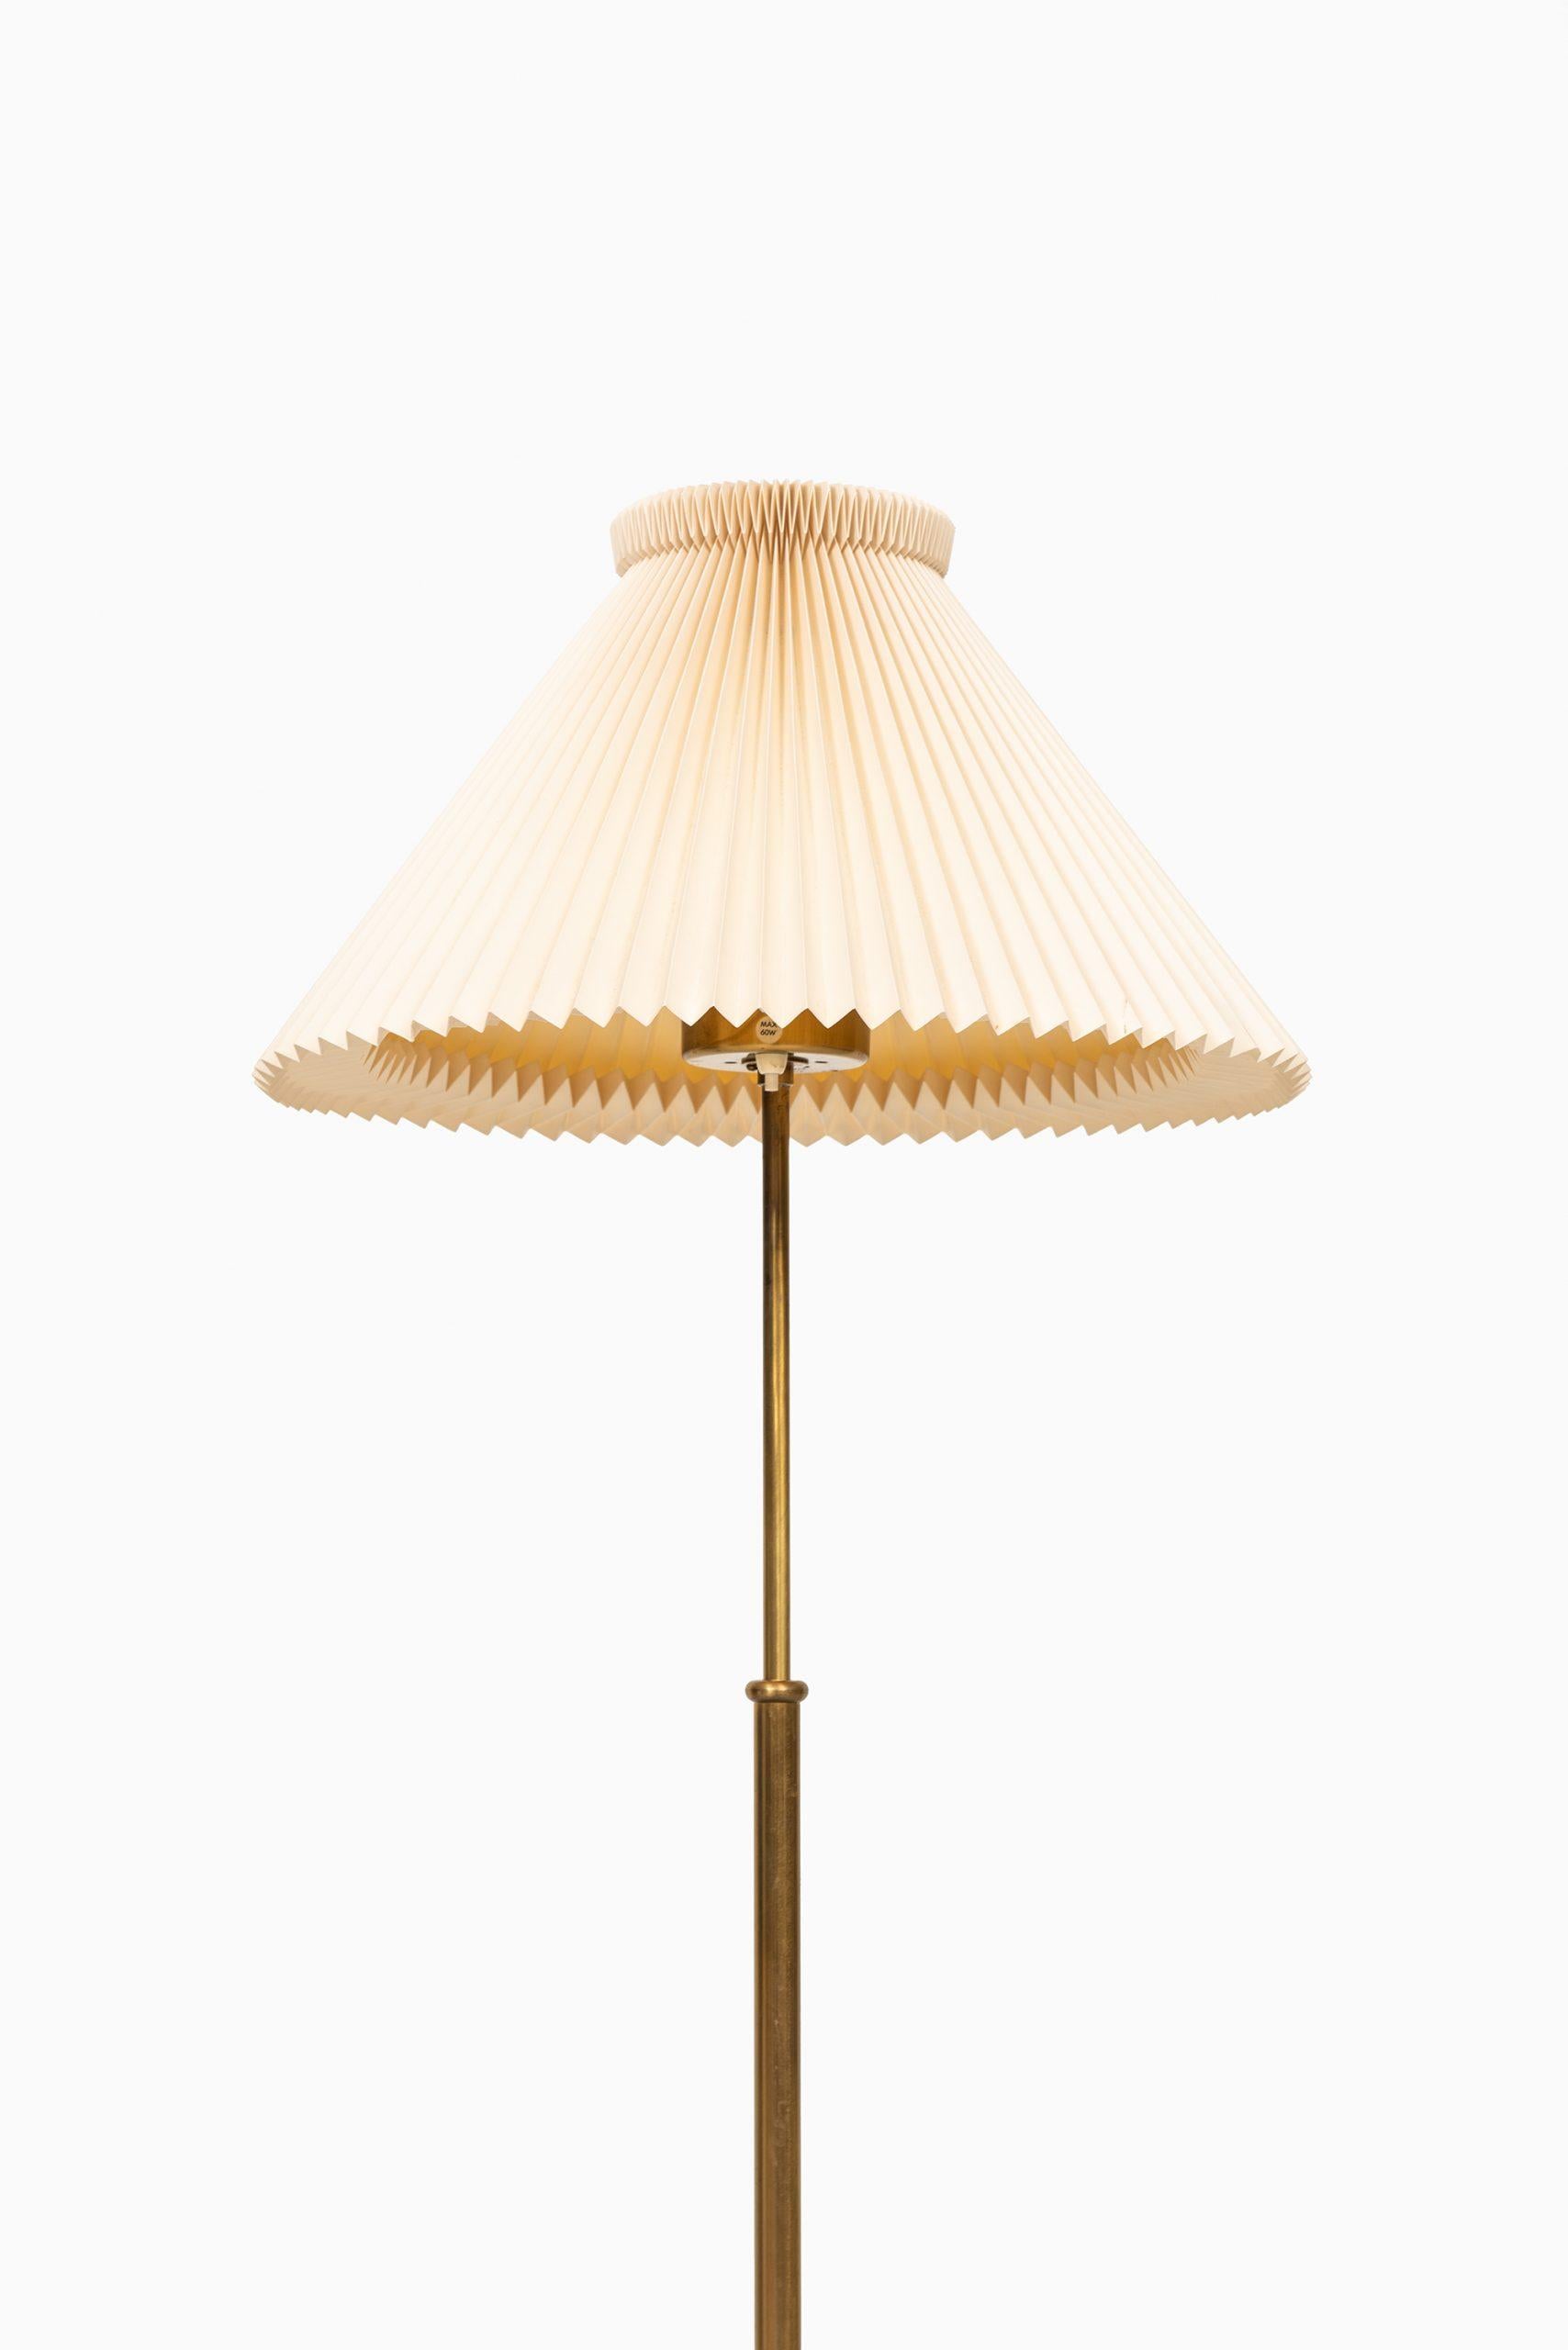 Rare height adjustable floor lamp model G2326 designed by Josef Frank. Produced by Svenskt Tenn in Sweden. Measure: Height: 125-180 cm.
Please note: This floor lamp will be sold without any lamp shade.